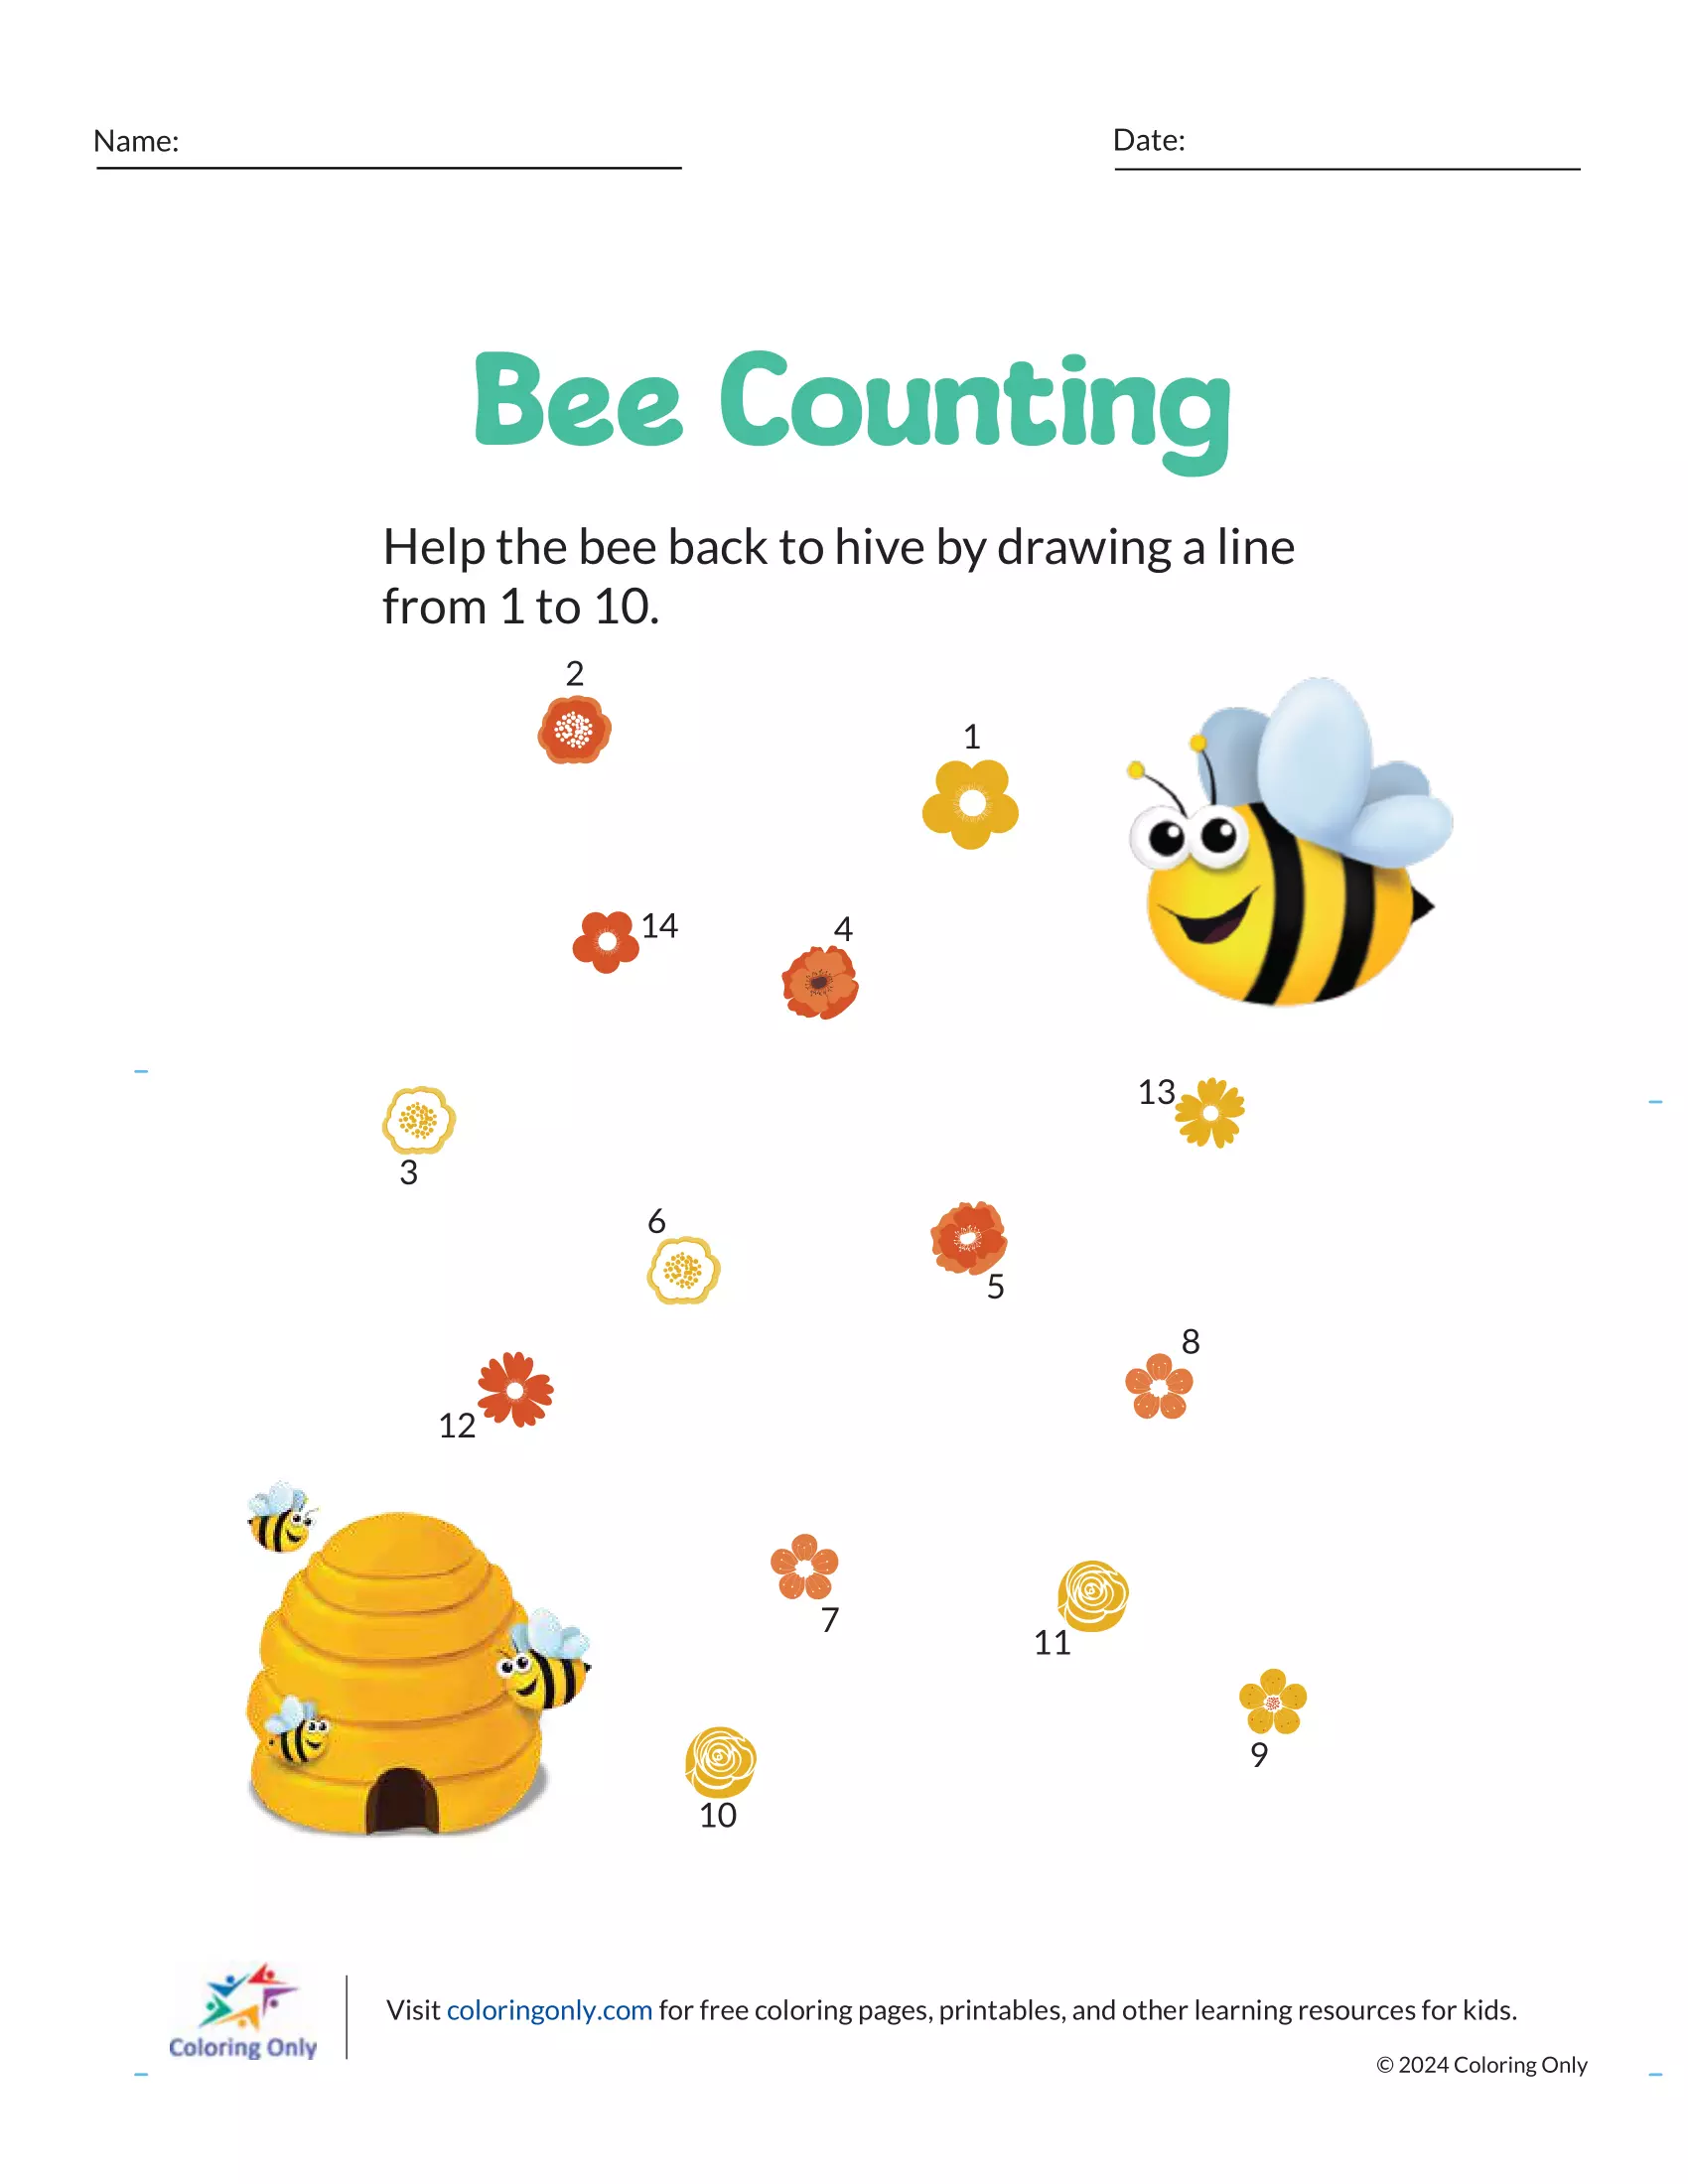 Engage your preschooler with our free printable worksheet "Bee Counting," perfect for improving number sequencing and fine motor skills. Discover more at coloringonly.com.